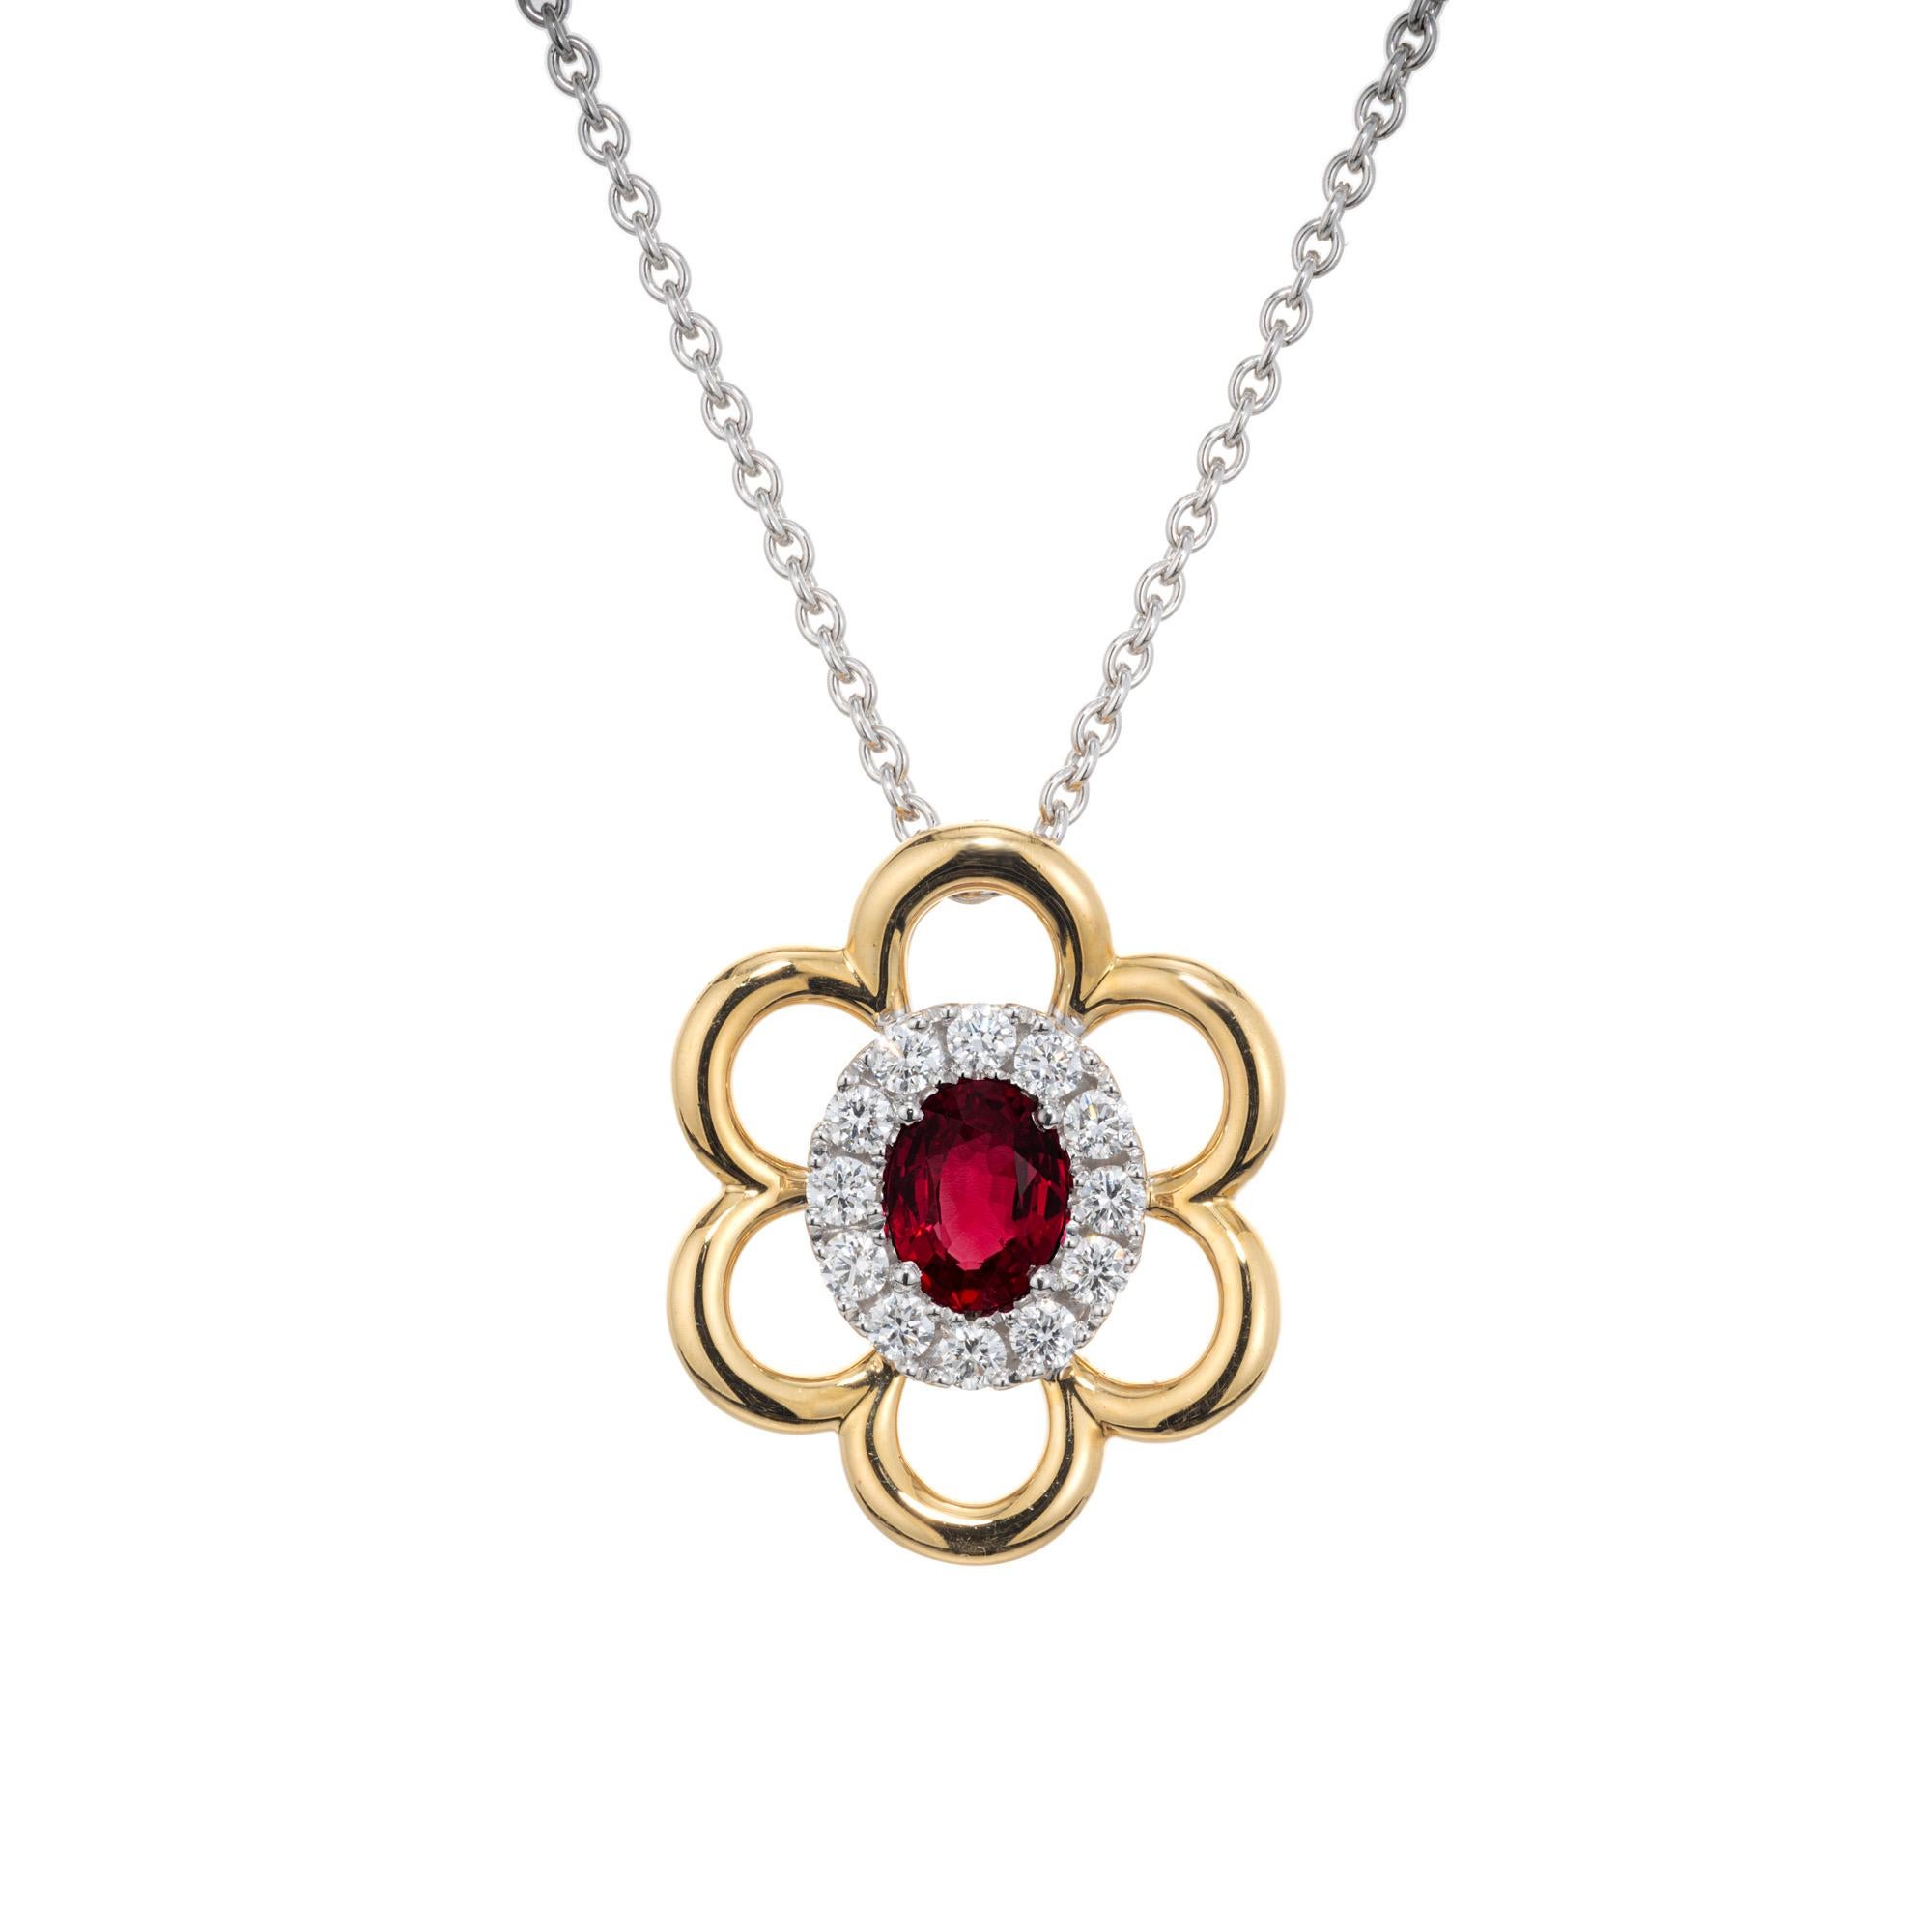 Ruby Diamond gold pendant necklace. GIA certified .50cts oval red ruby center stone with a halo of 12 round cut diamonds that are framed by a flower style 18k yellow gold halo. The 18k white gold chain is 18 inches in length. Designed and created by